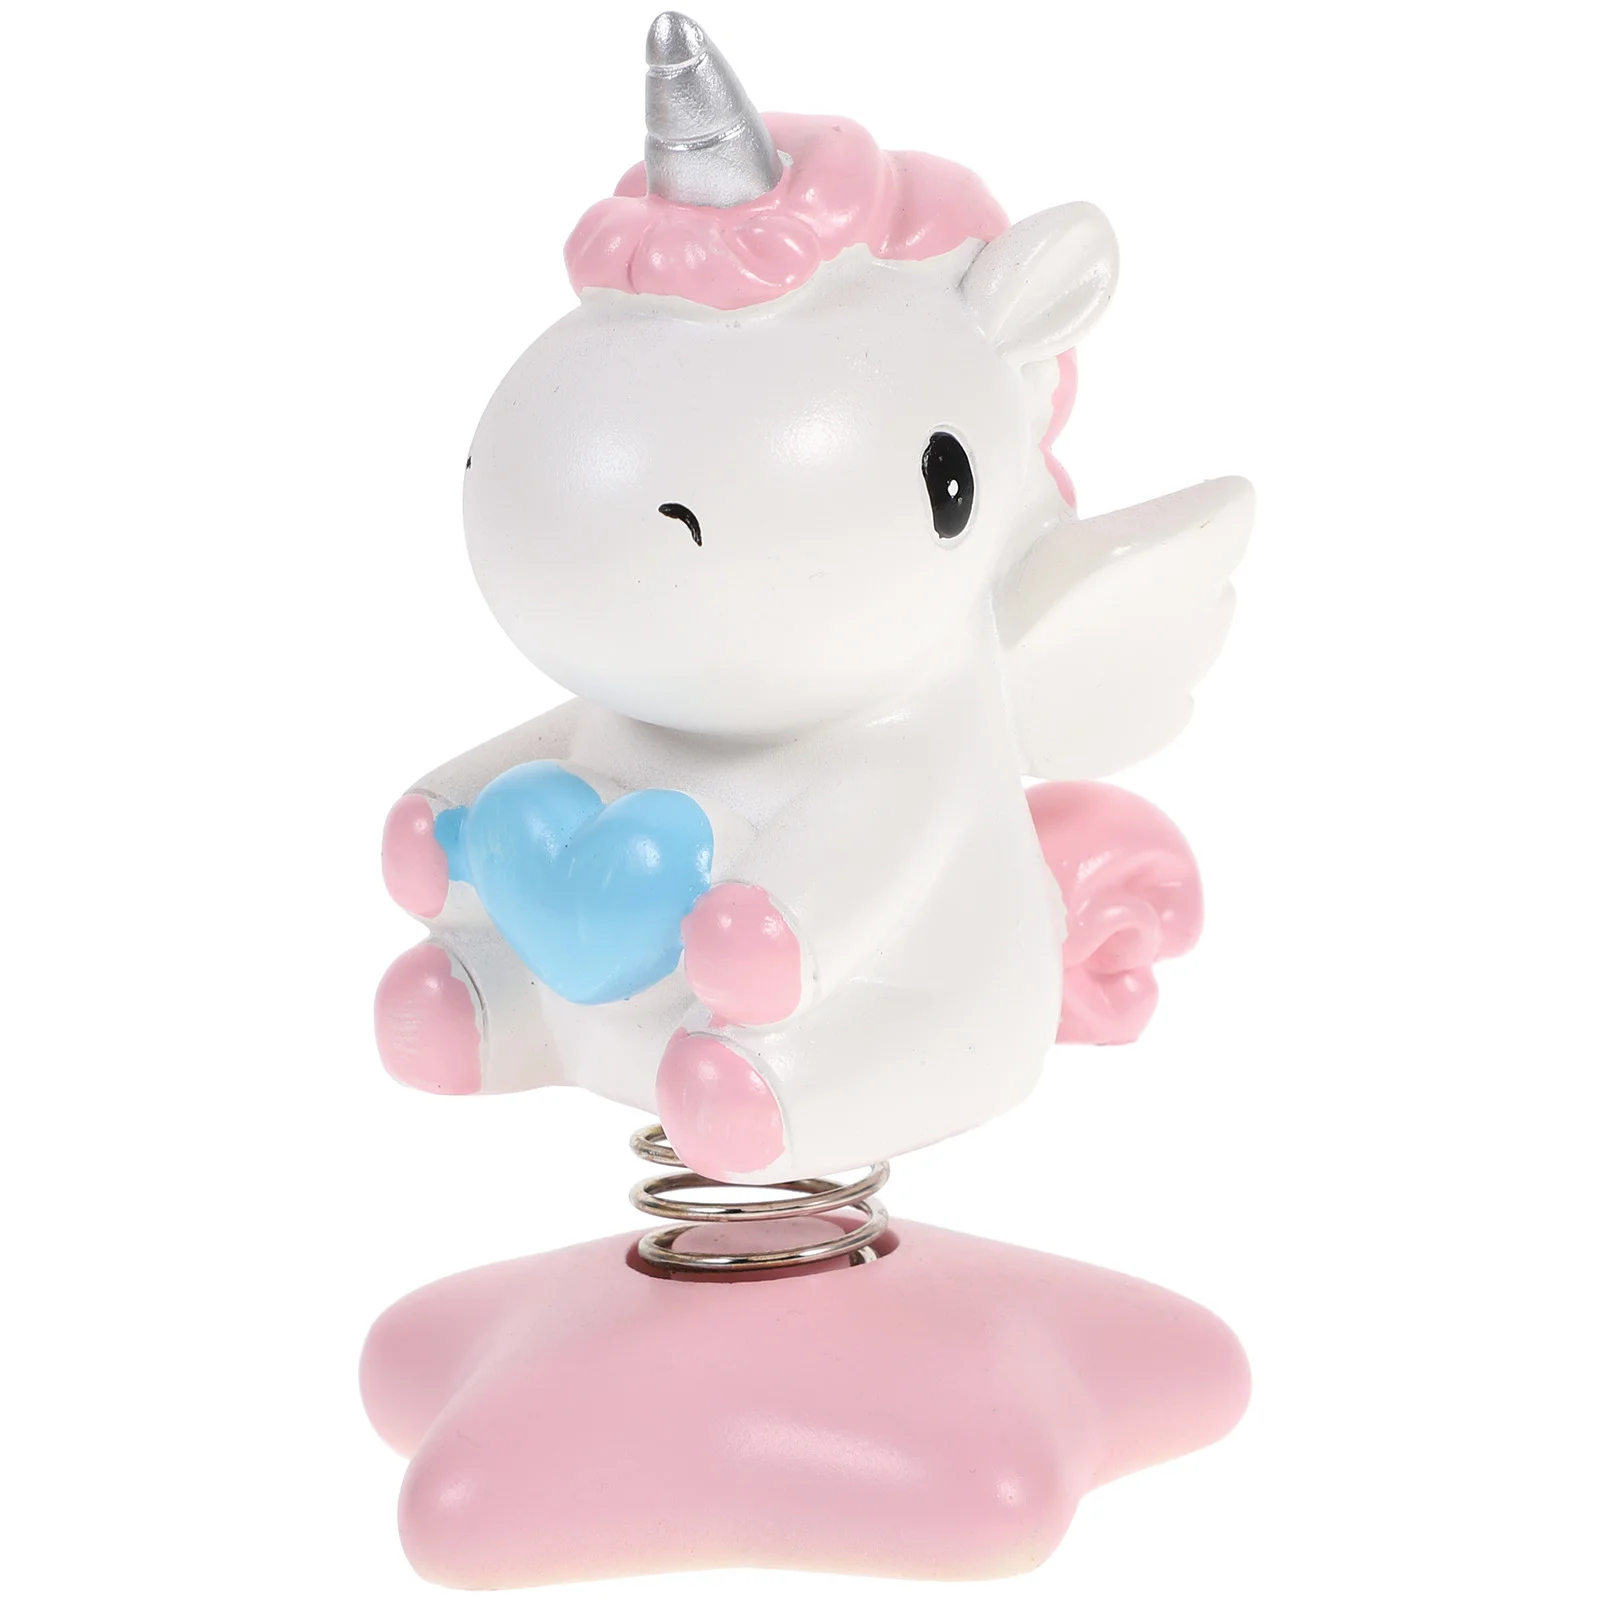 Unicorn Statues Figurines Cake Toy Car Ornaments Interior Display Dashboard Decoration Accessory Toys Swing Desk Home Party